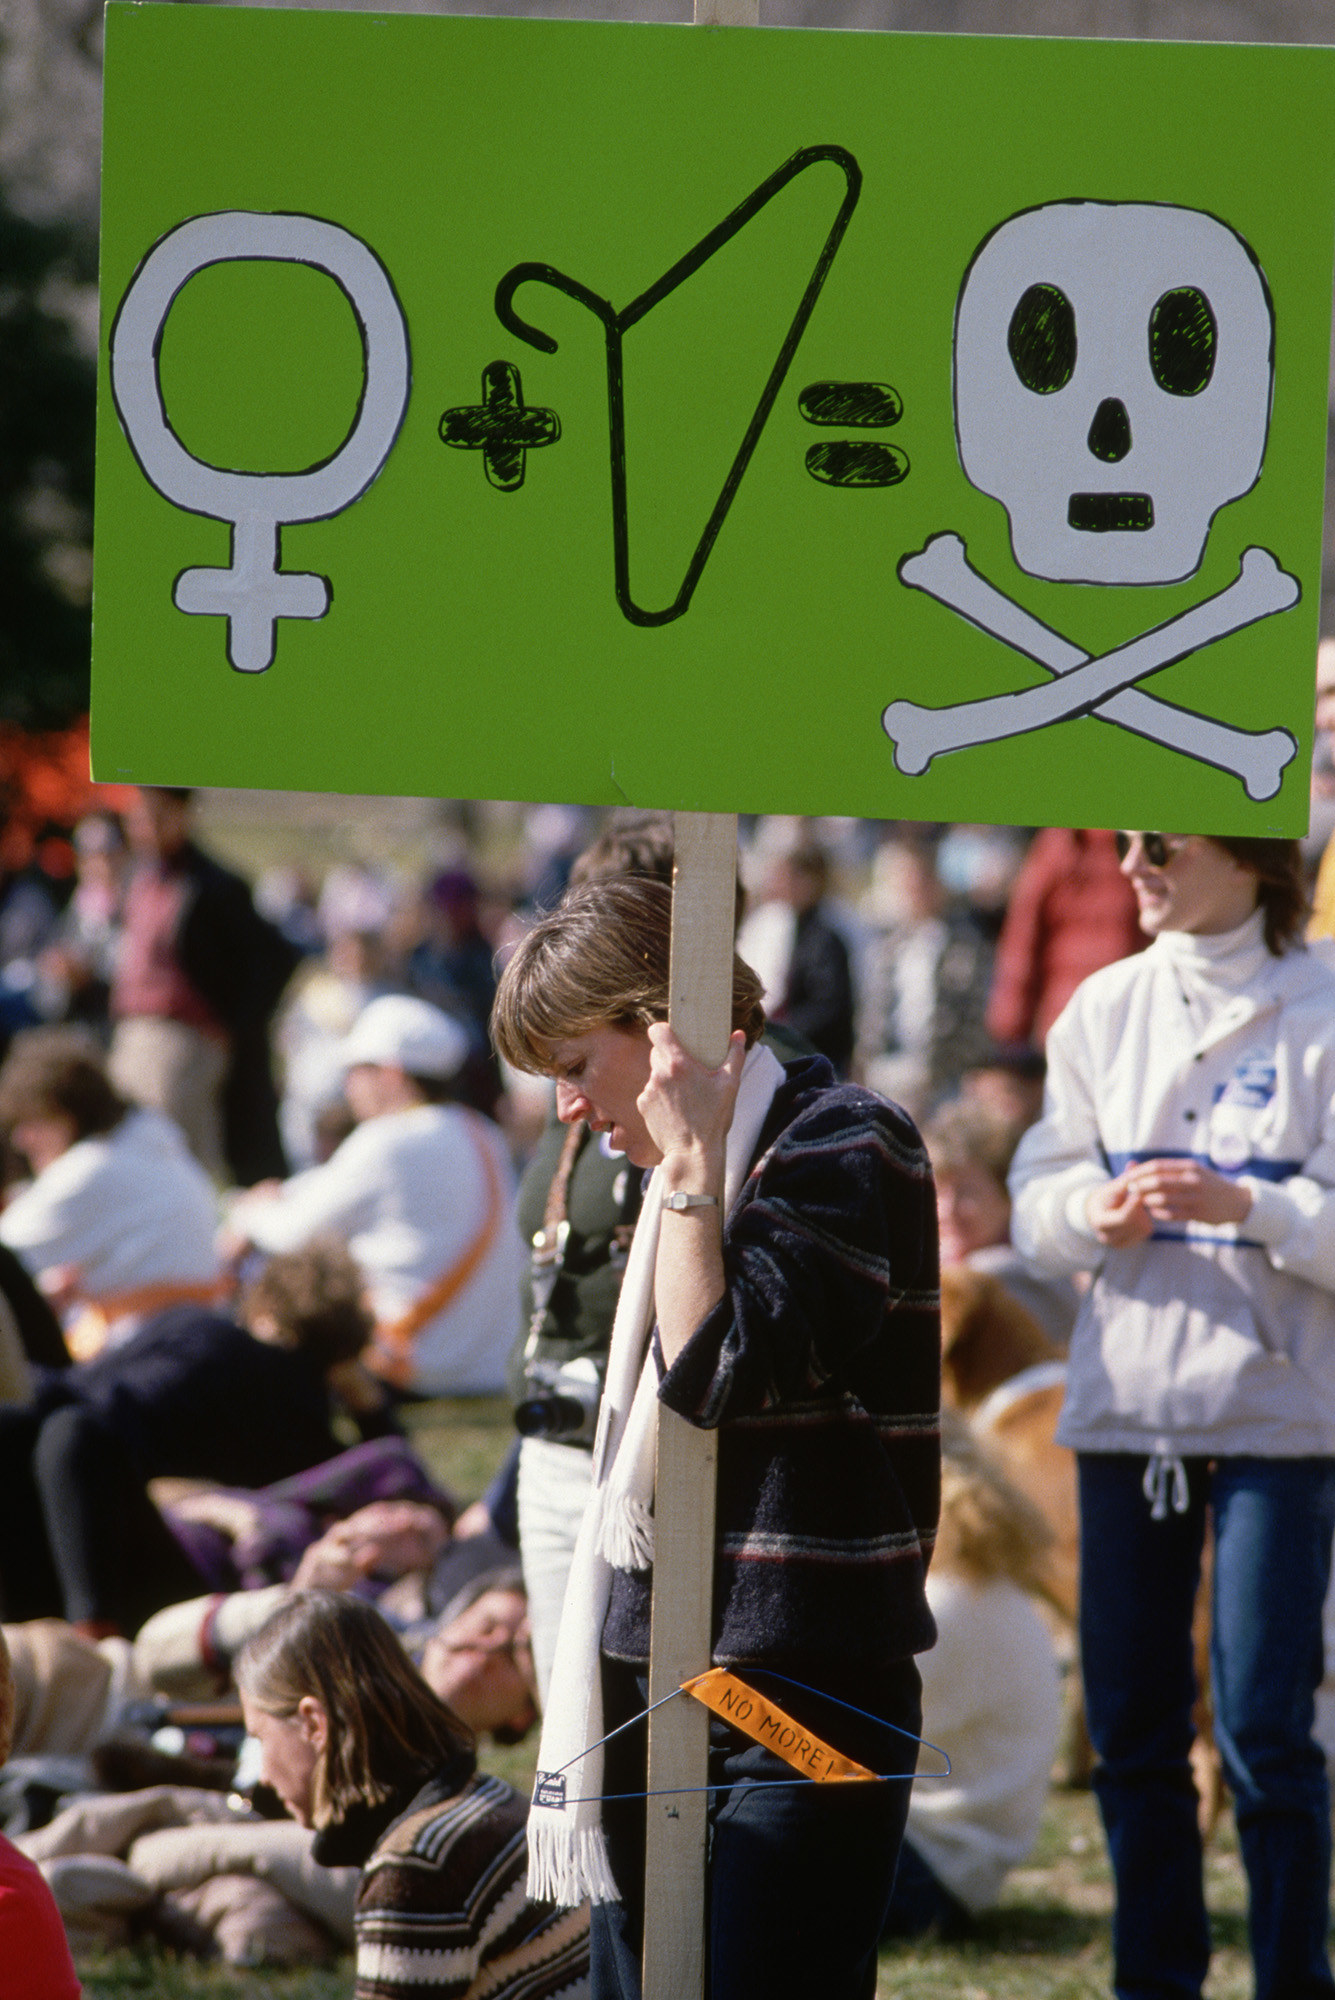 A protest sign shows an equation of a gender glyph denoting women plus a coat hanger equals death, represented by a skull and crossbones